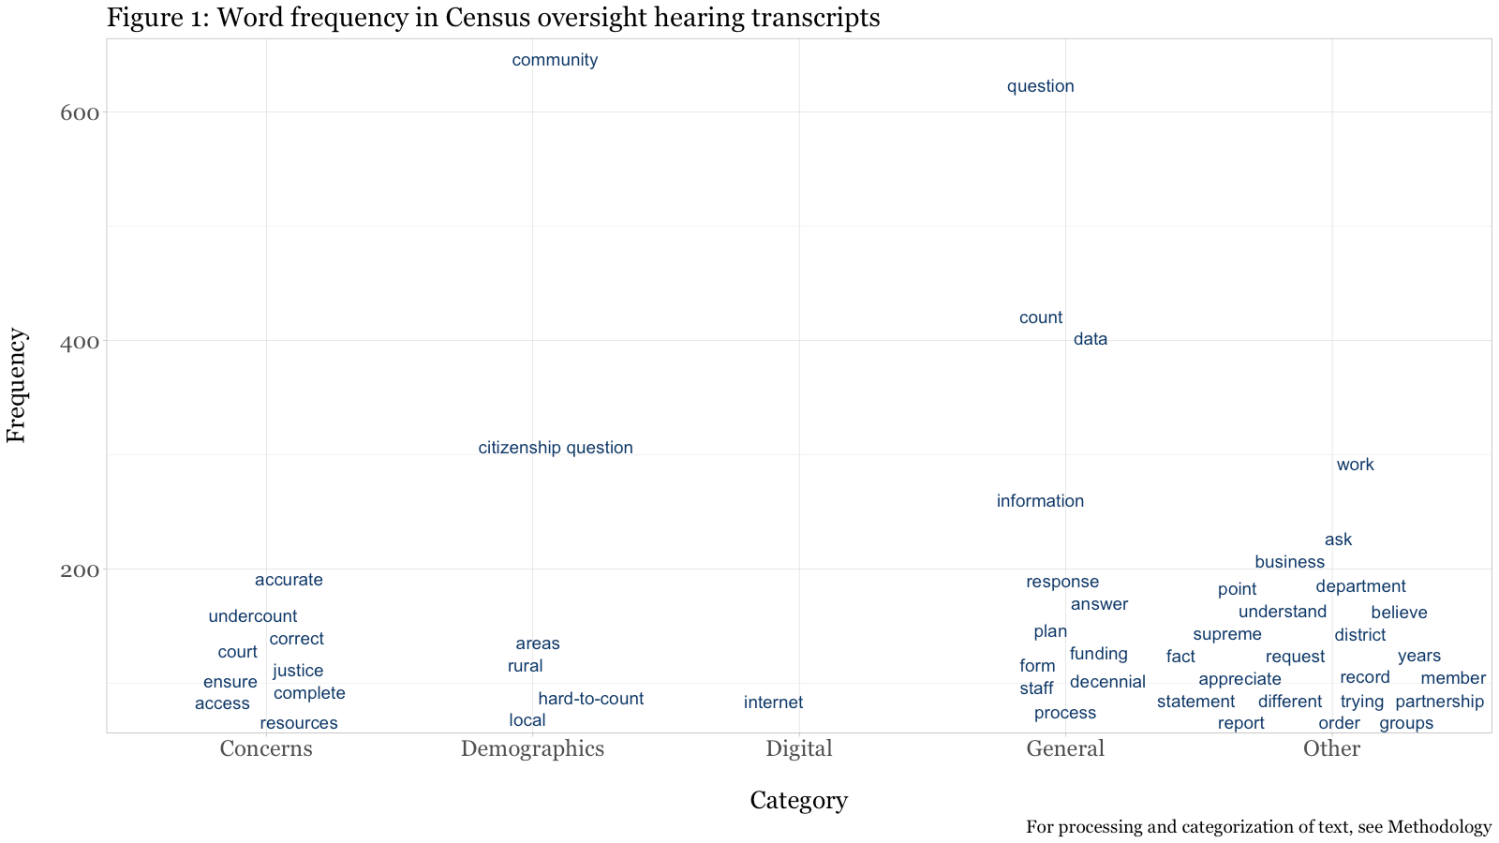 Text mapping of congressional oversight hearing transcripts